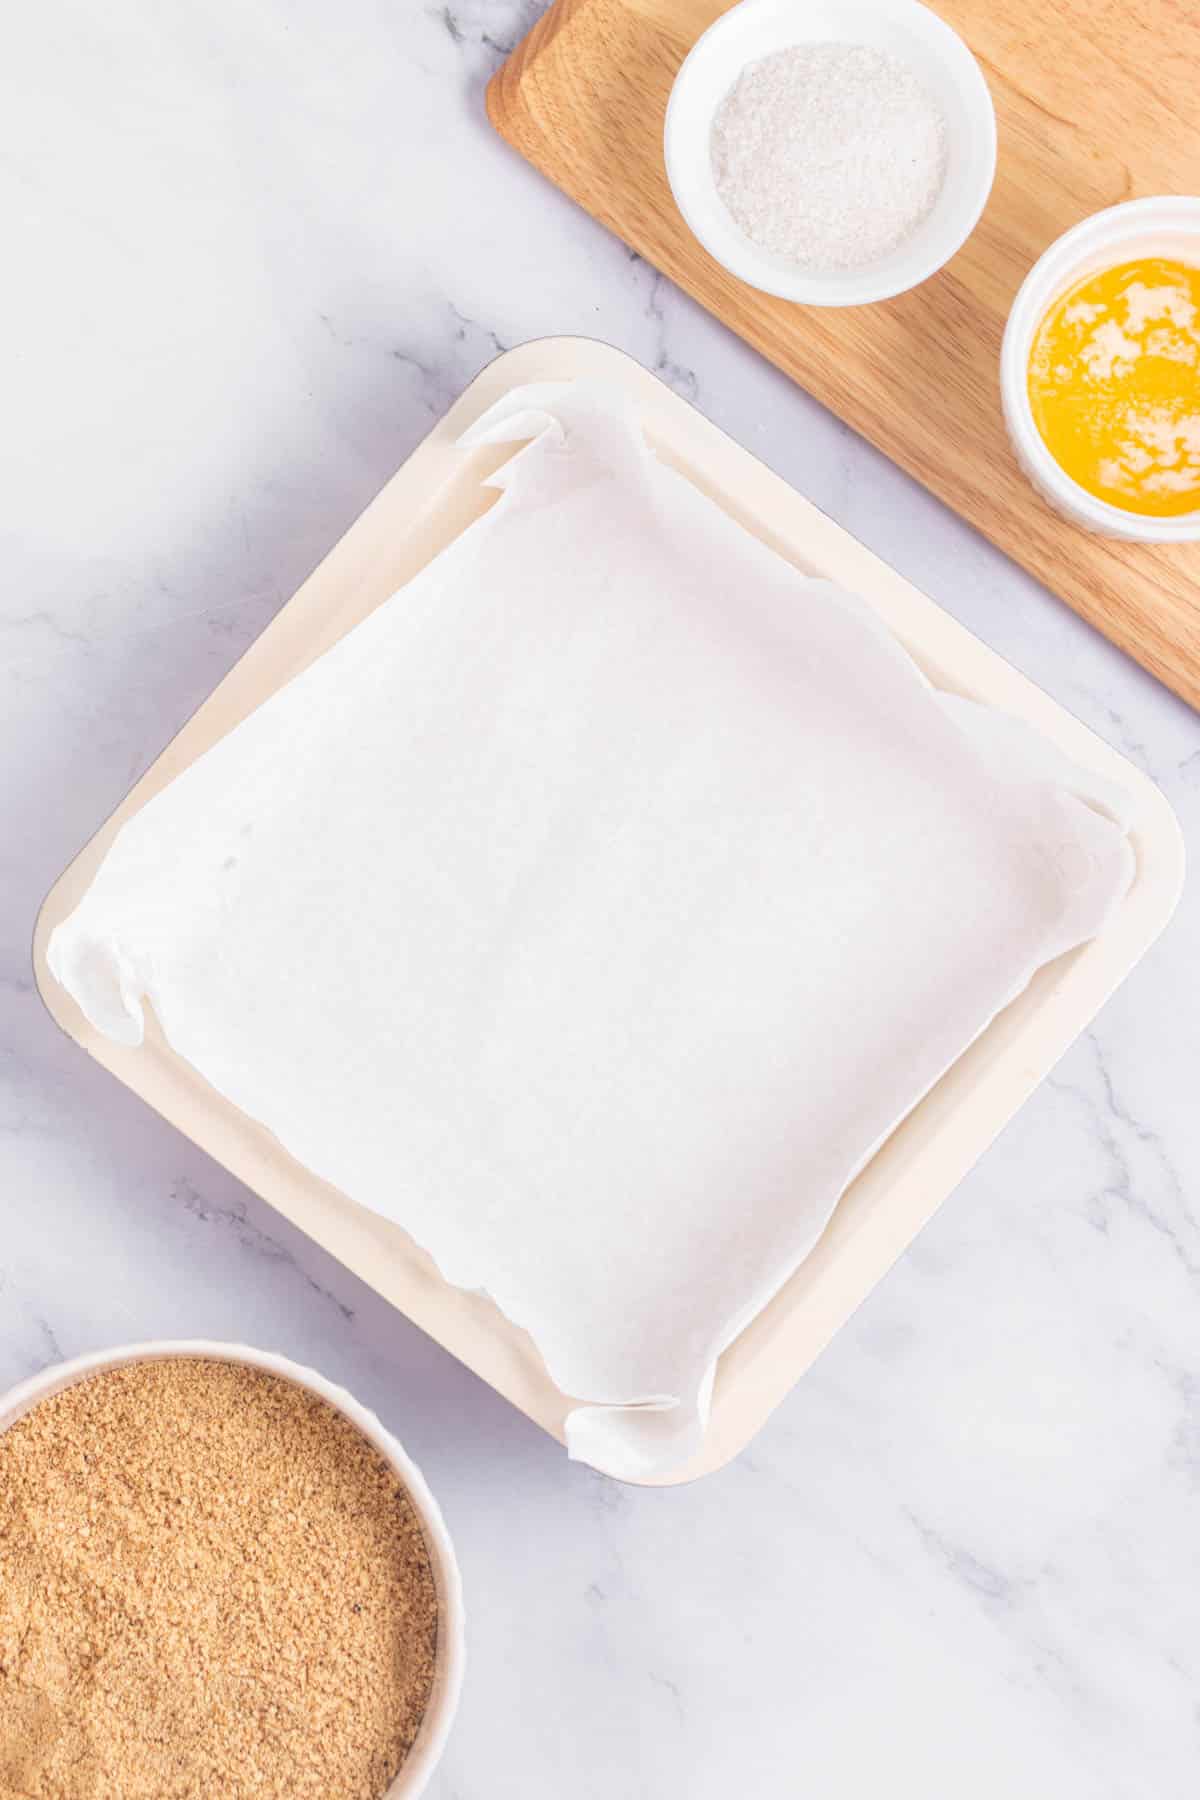 Square pan lined with parchment paper.